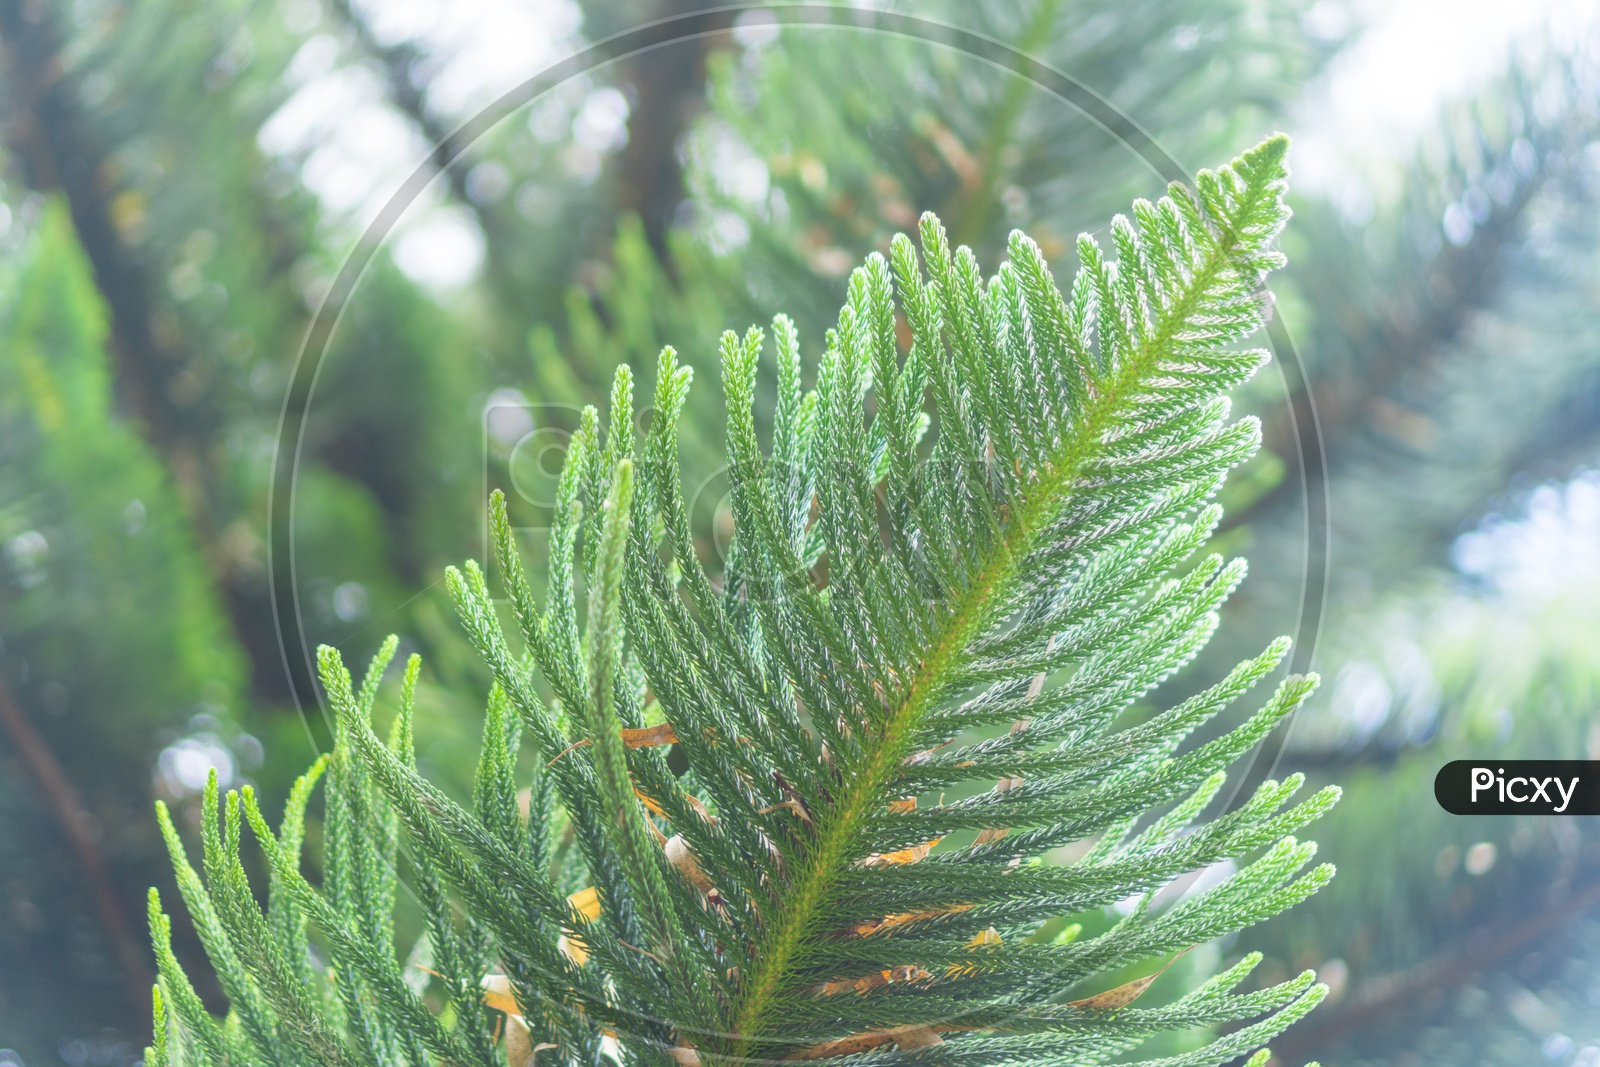 Pine tree Leafs Forming a Background